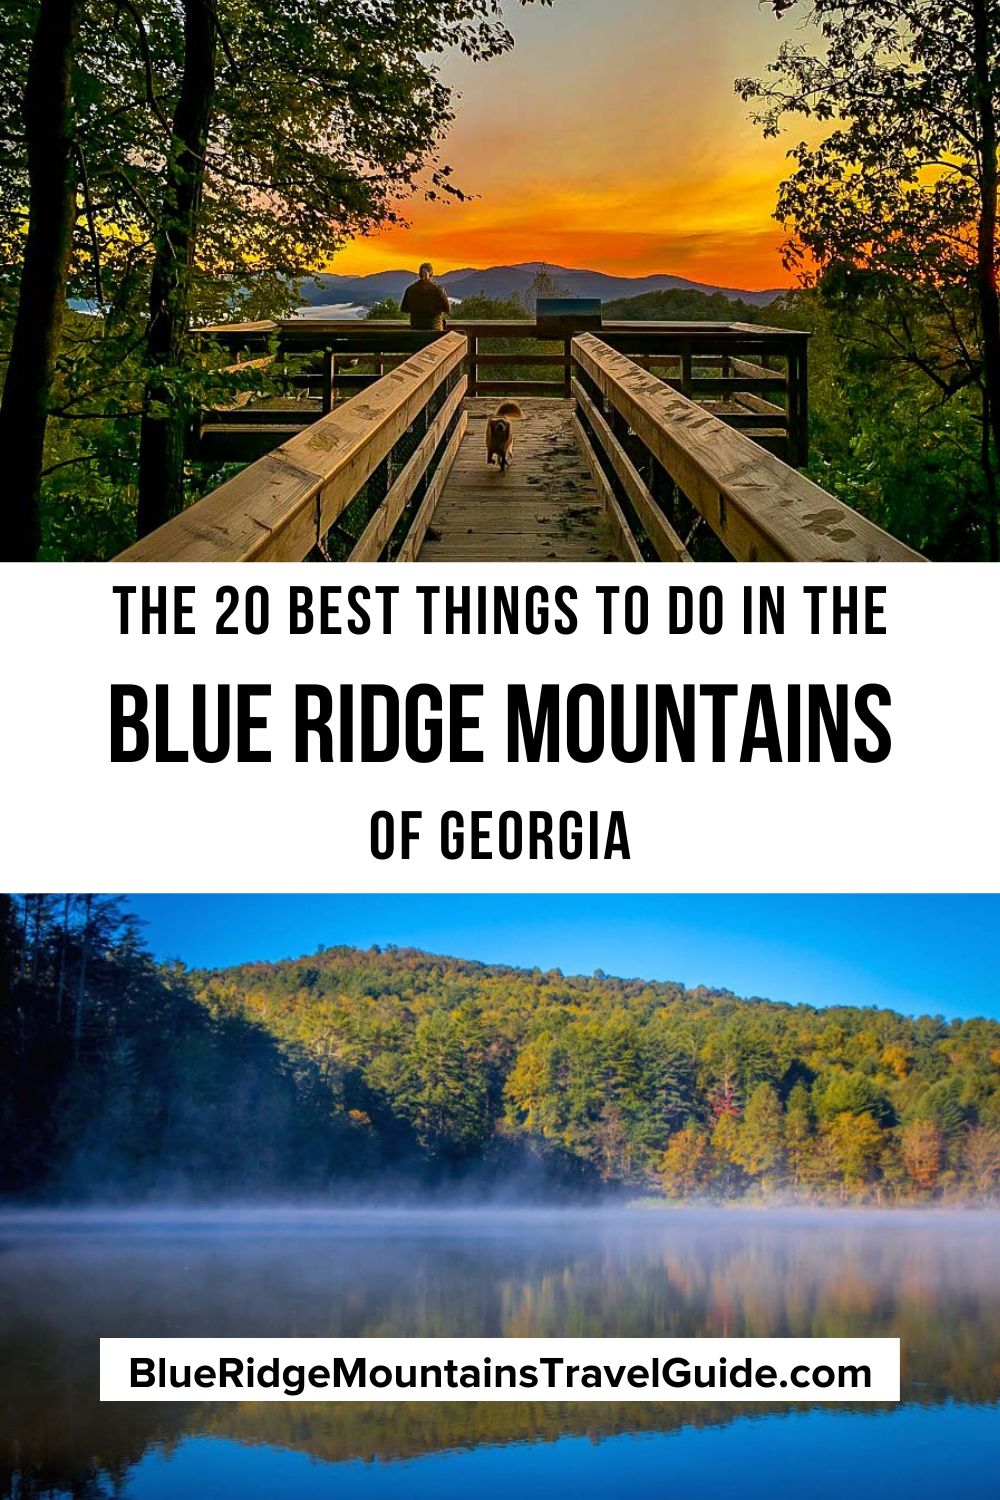 Top 20 Things to Do in the Blue Ridge Mountains of Georgia